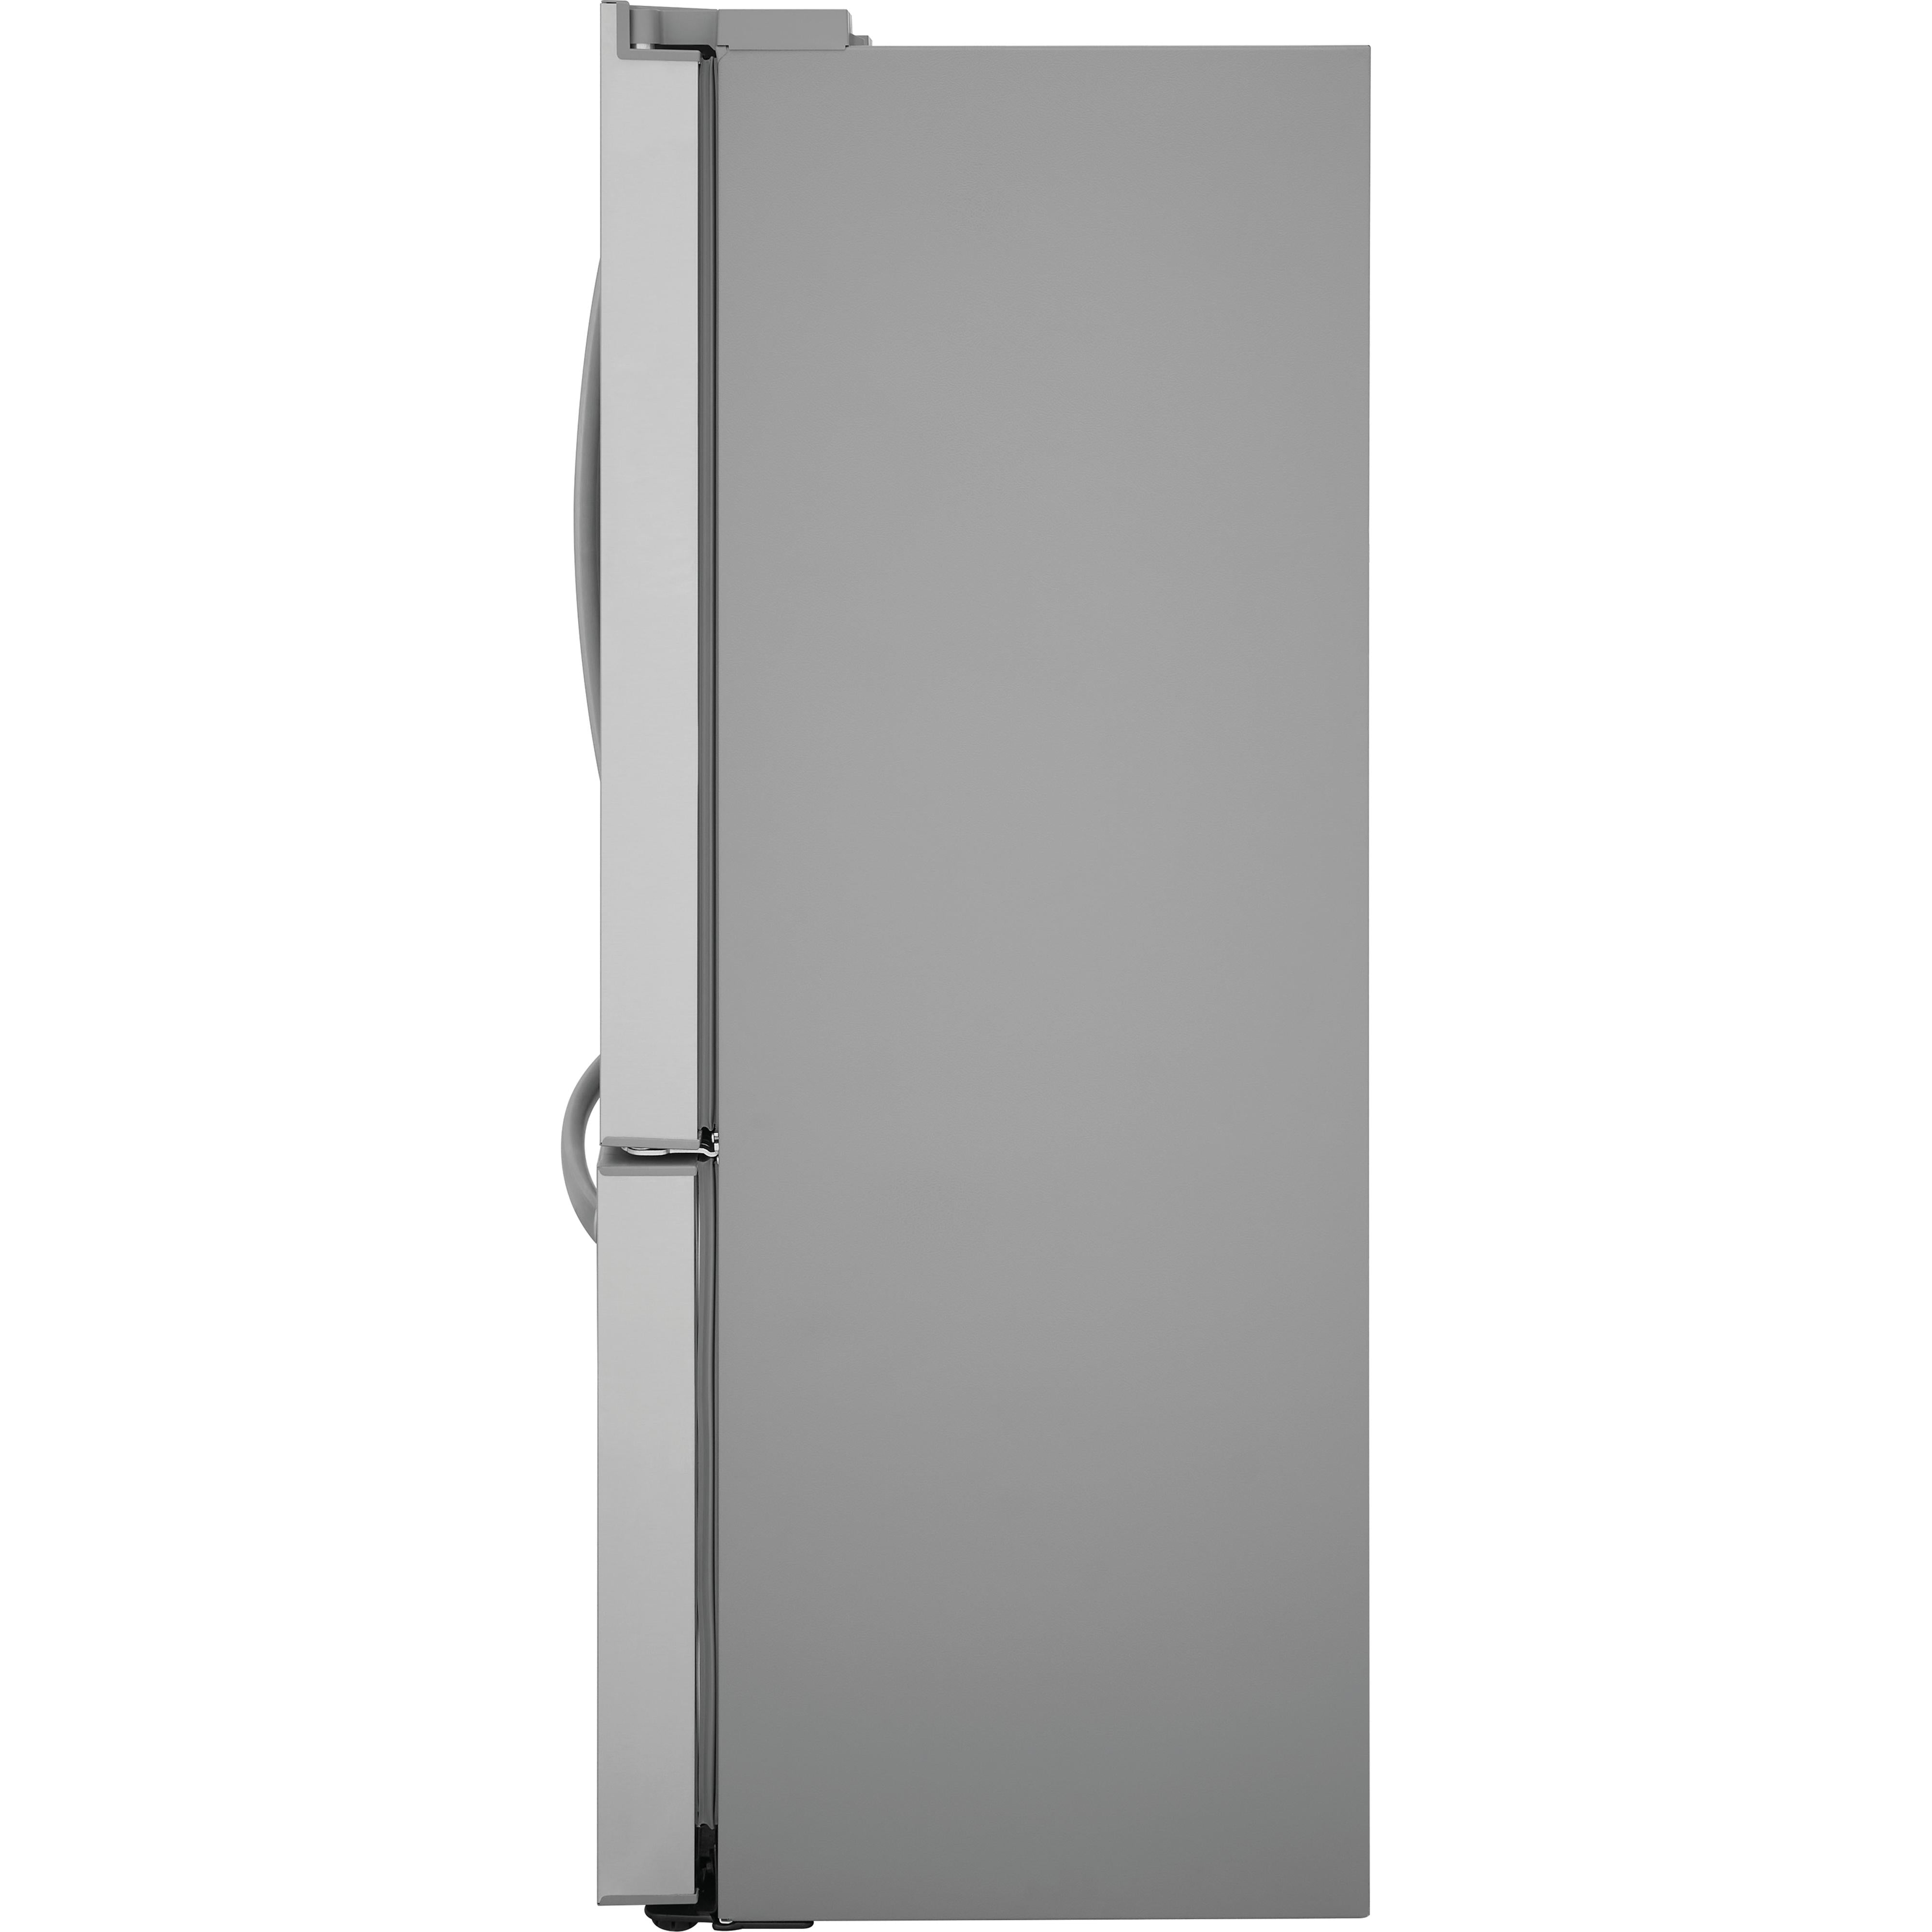 Frigidaire 36-inch, 22.6 cu. ft. French 3-Door Refrigerator with Dispenser FRFC2323AS